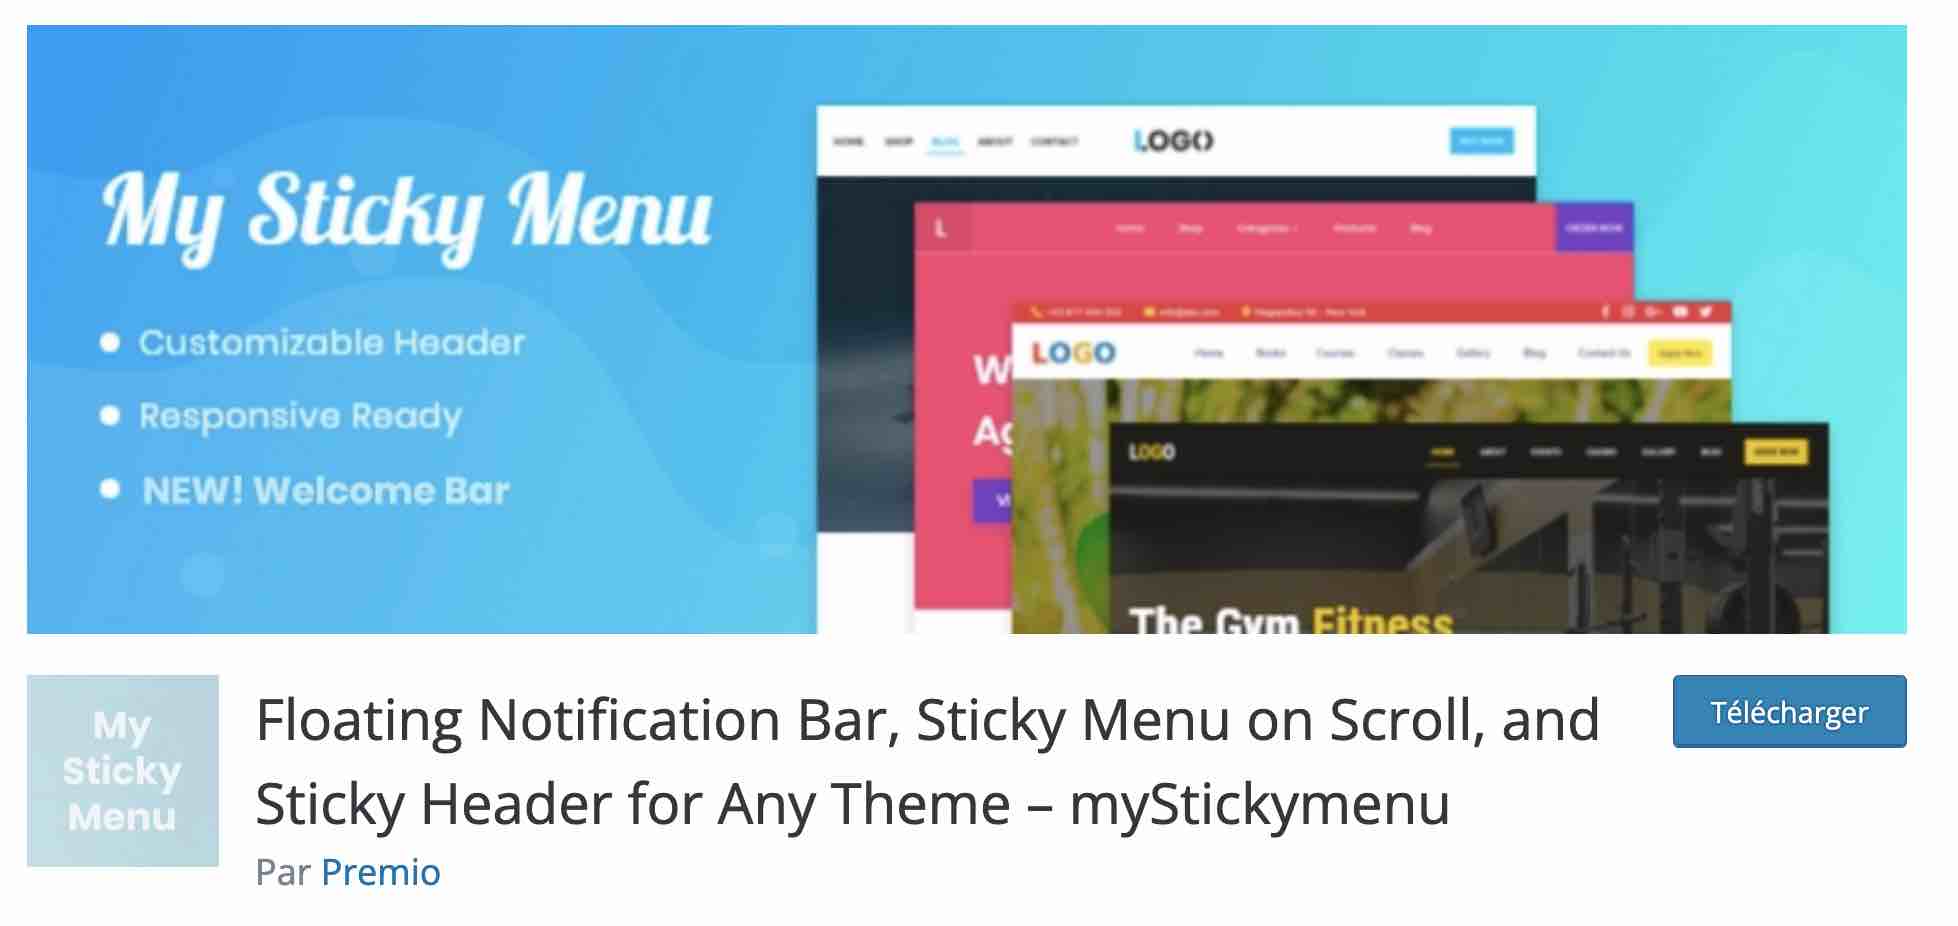 myStickymenu allows you to create a fixed menu on scroll.